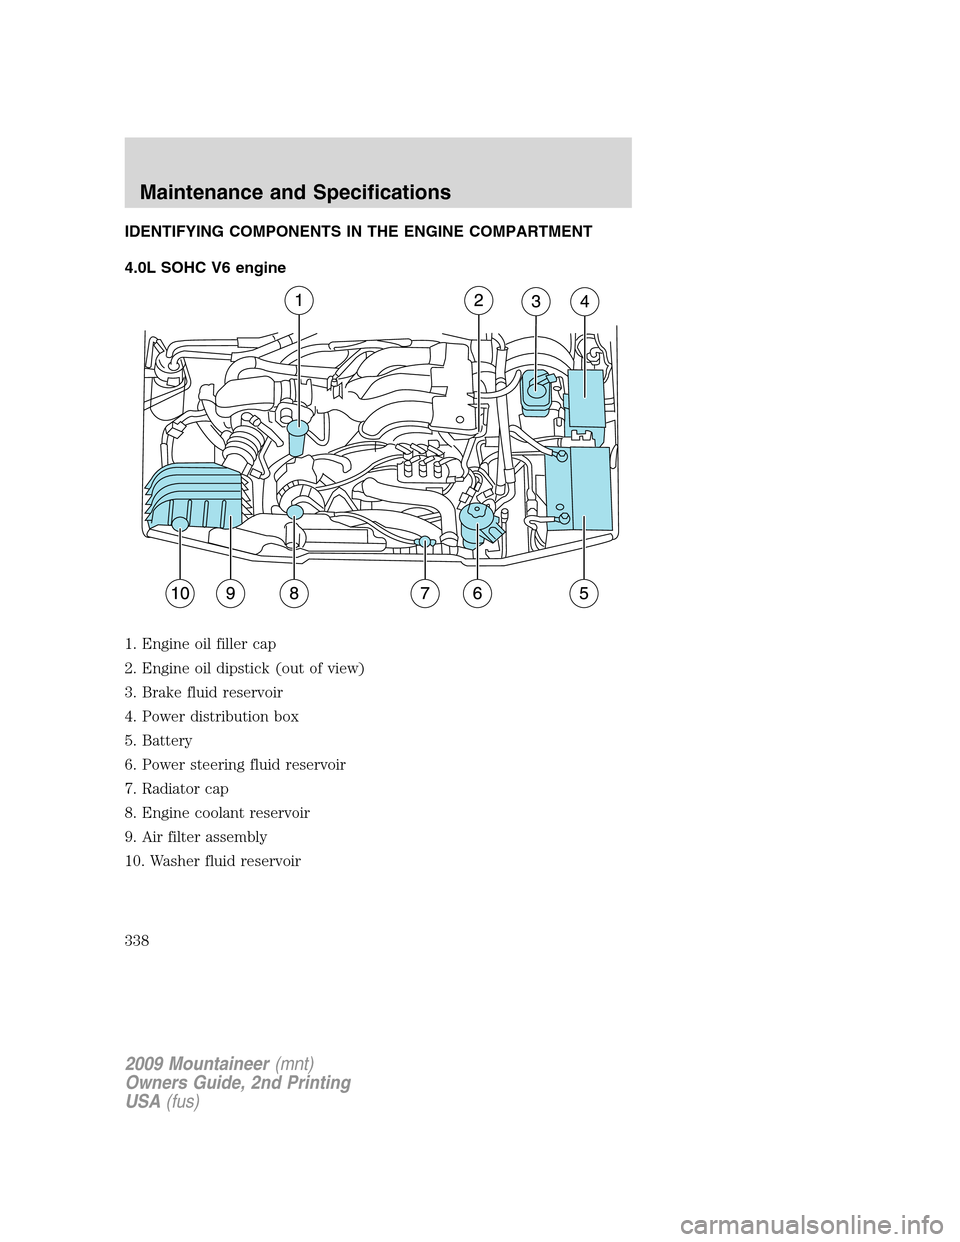 Mercury Mountaineer 2009  Owners Manuals IDENTIFYING COMPONENTS IN THE ENGINE COMPARTMENT
4.0L SOHC V6 engine
1. Engine oil filler cap
2. Engine oil dipstick (out of view)
3. Brake fluid reservoir
4. Power distribution box
5. Battery
6. Powe